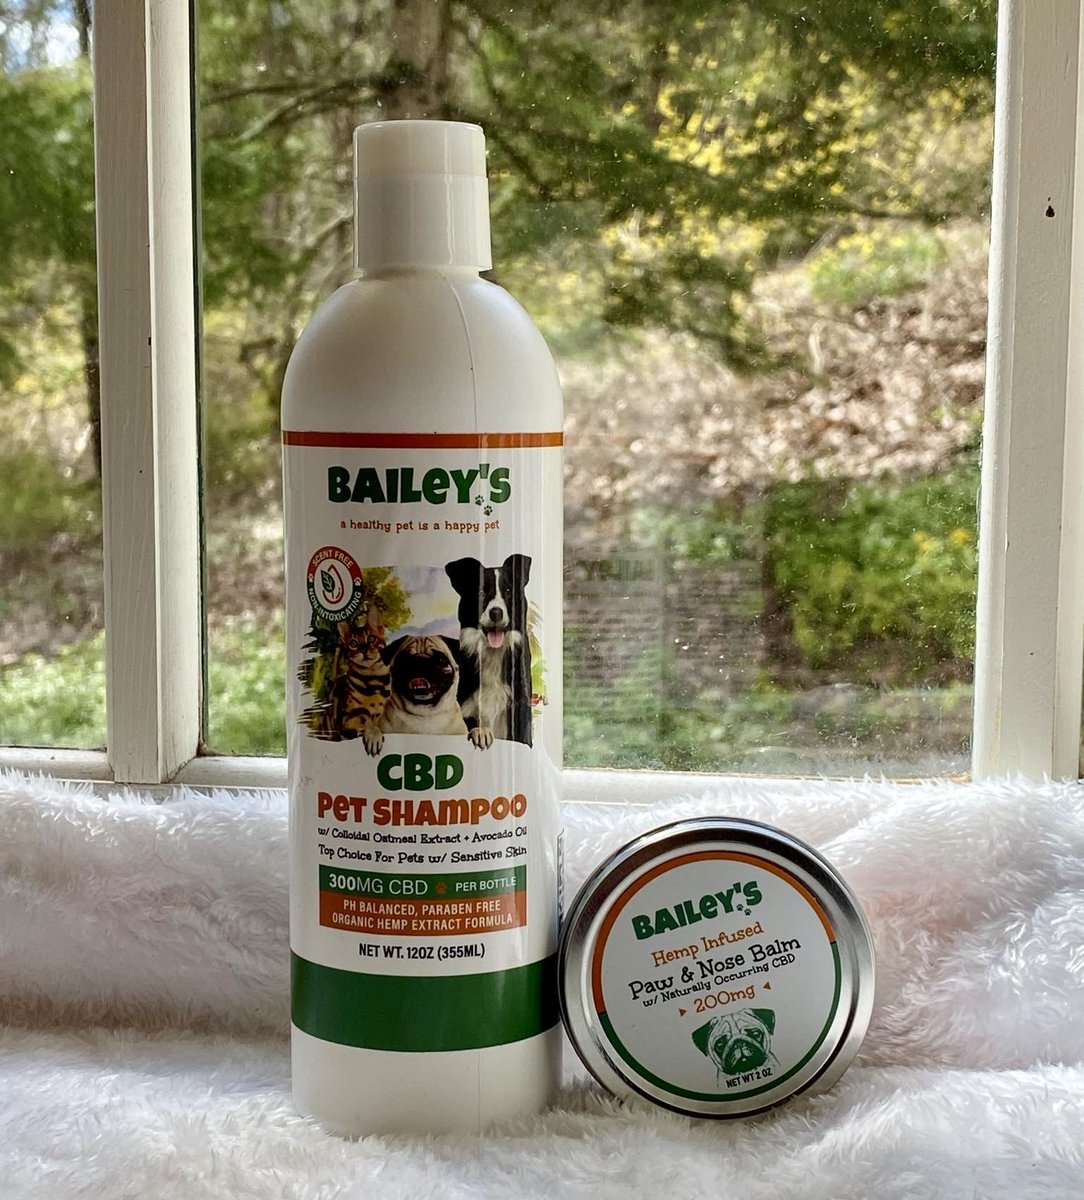 Today's #FreebieFriday giveaway prizes are a @baileyscbd Pet Shampoo and Paw & Nose Balm! Bailey's #CBD topicals are non-toxic & provide relief by interacting directly w/ the endocannabinoid system through receptors on a pet's skin. Visit Pet Age on IG for giveaway details! #pets